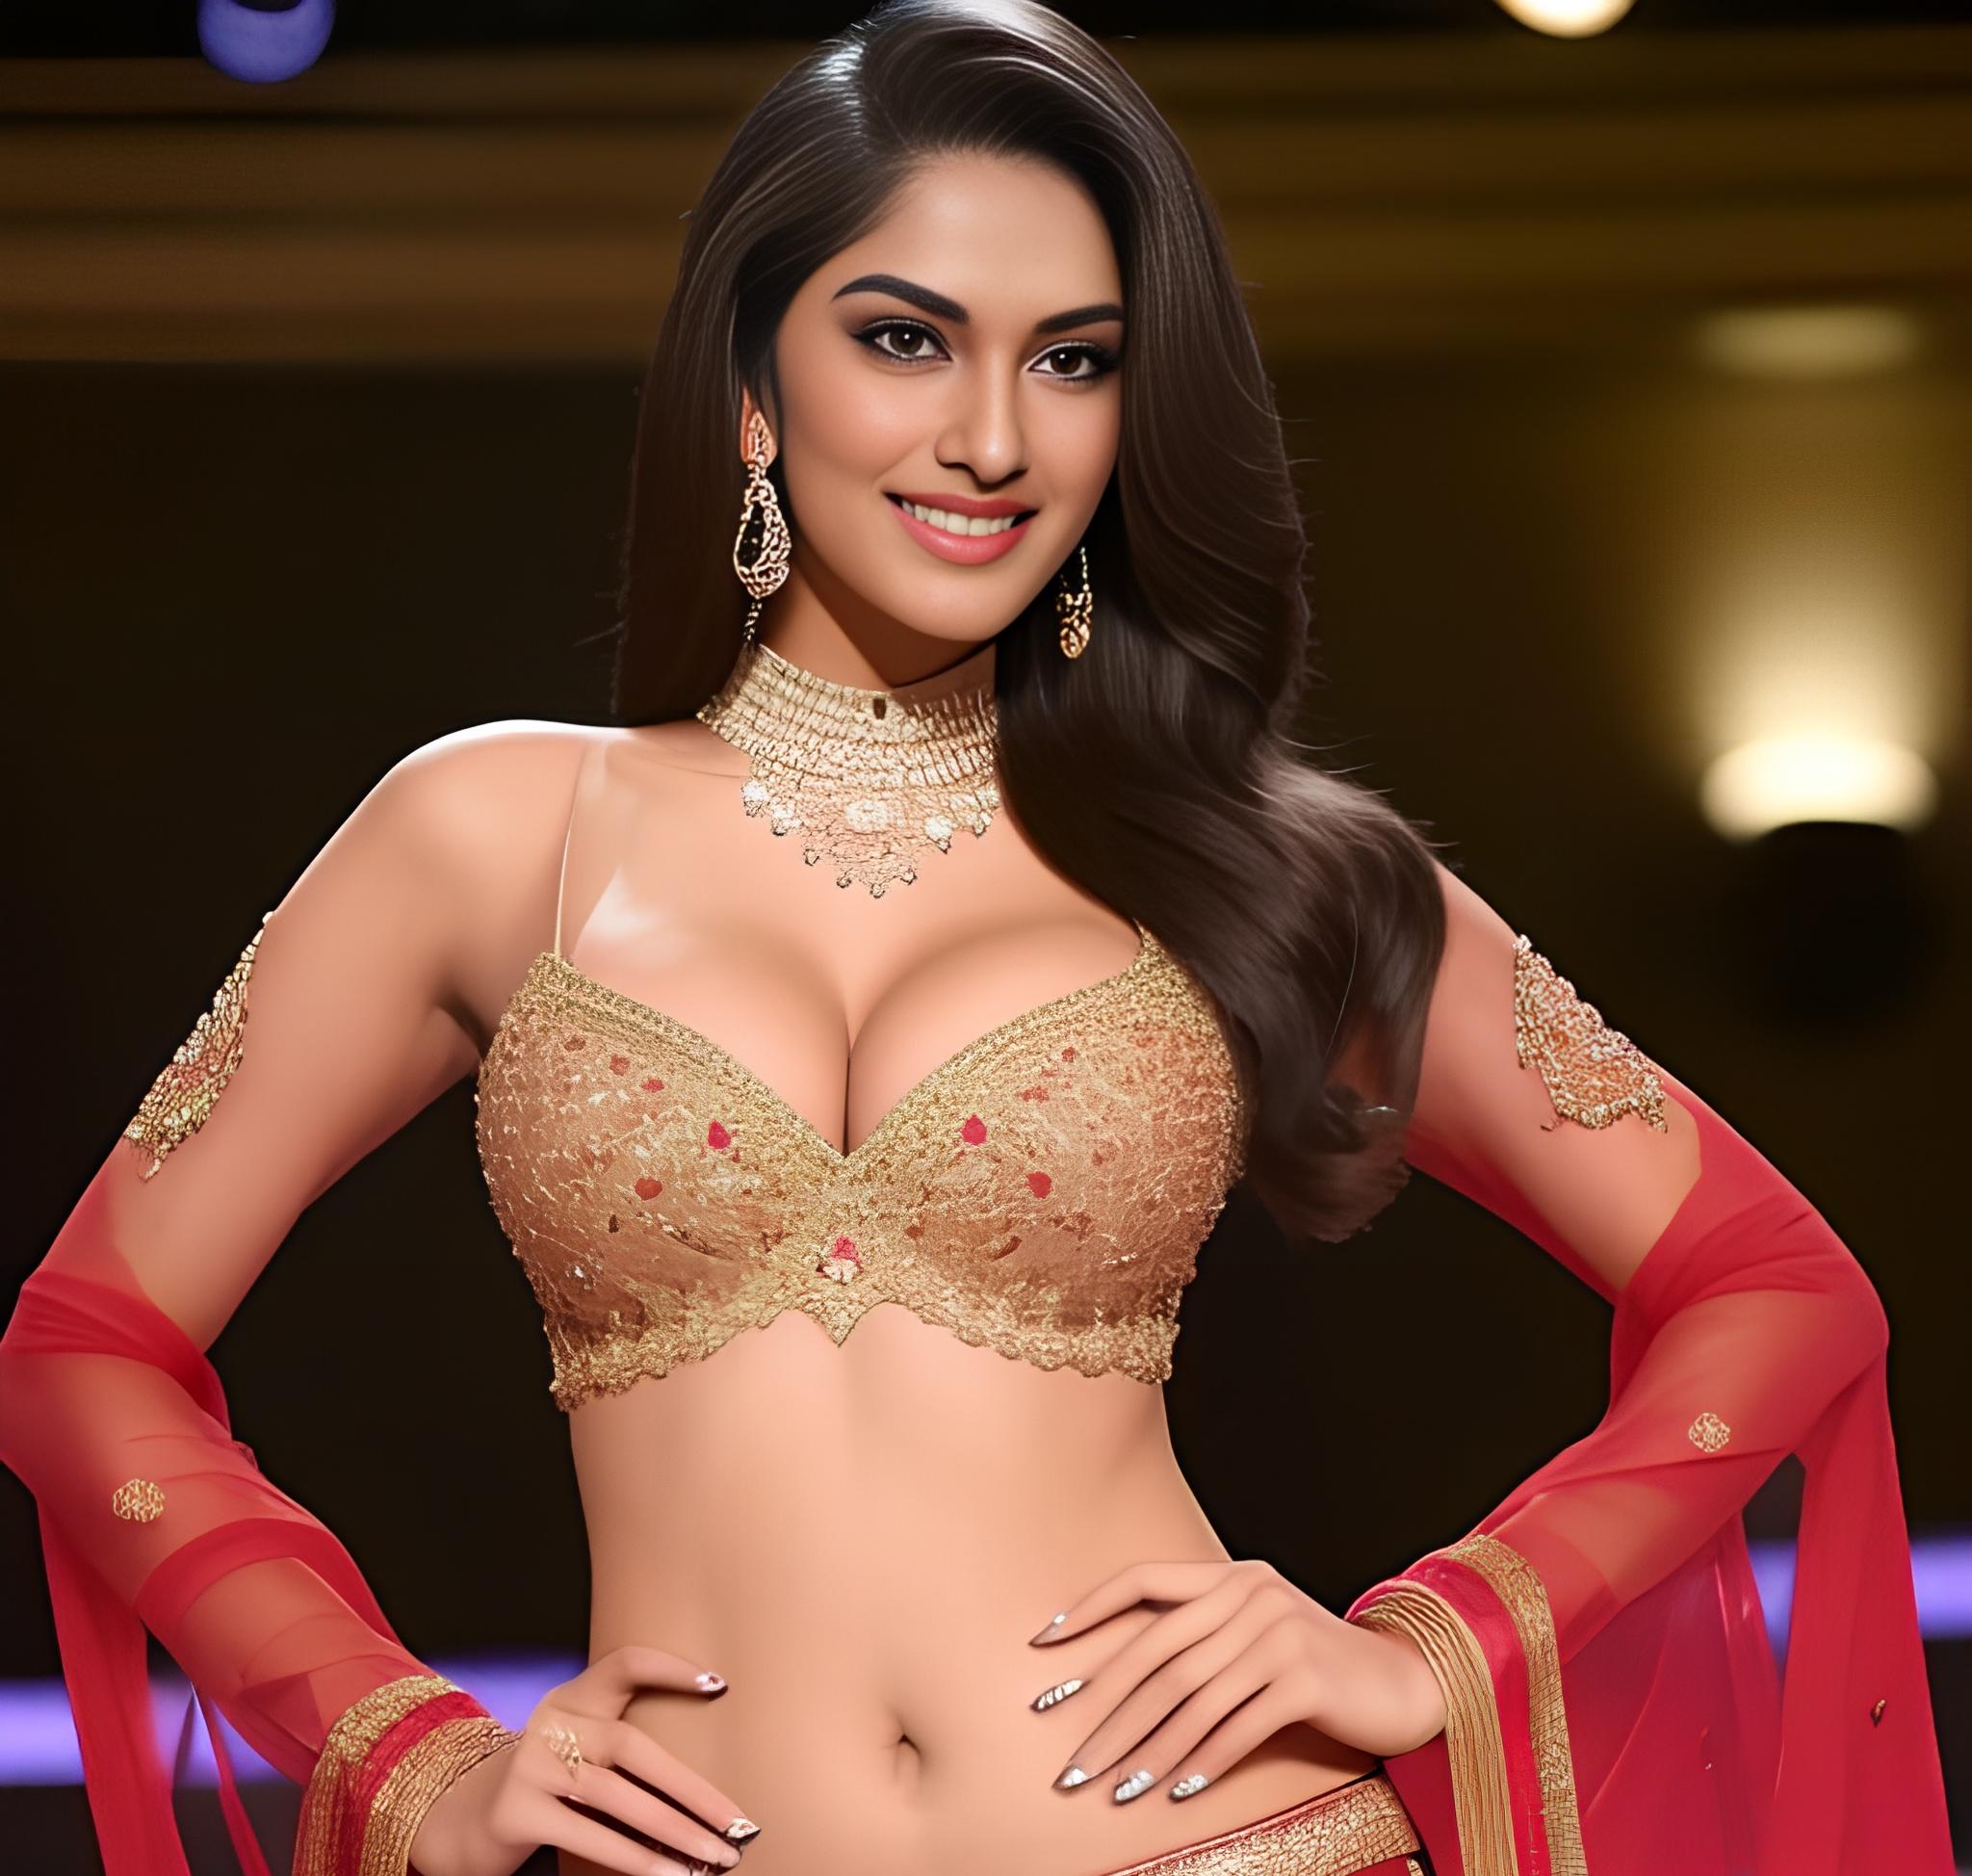 Beautyful Lady Gold Hd Porn - Miss Universe Model Indian with Perfect Skinny Traditional Boobs: Beautiful!